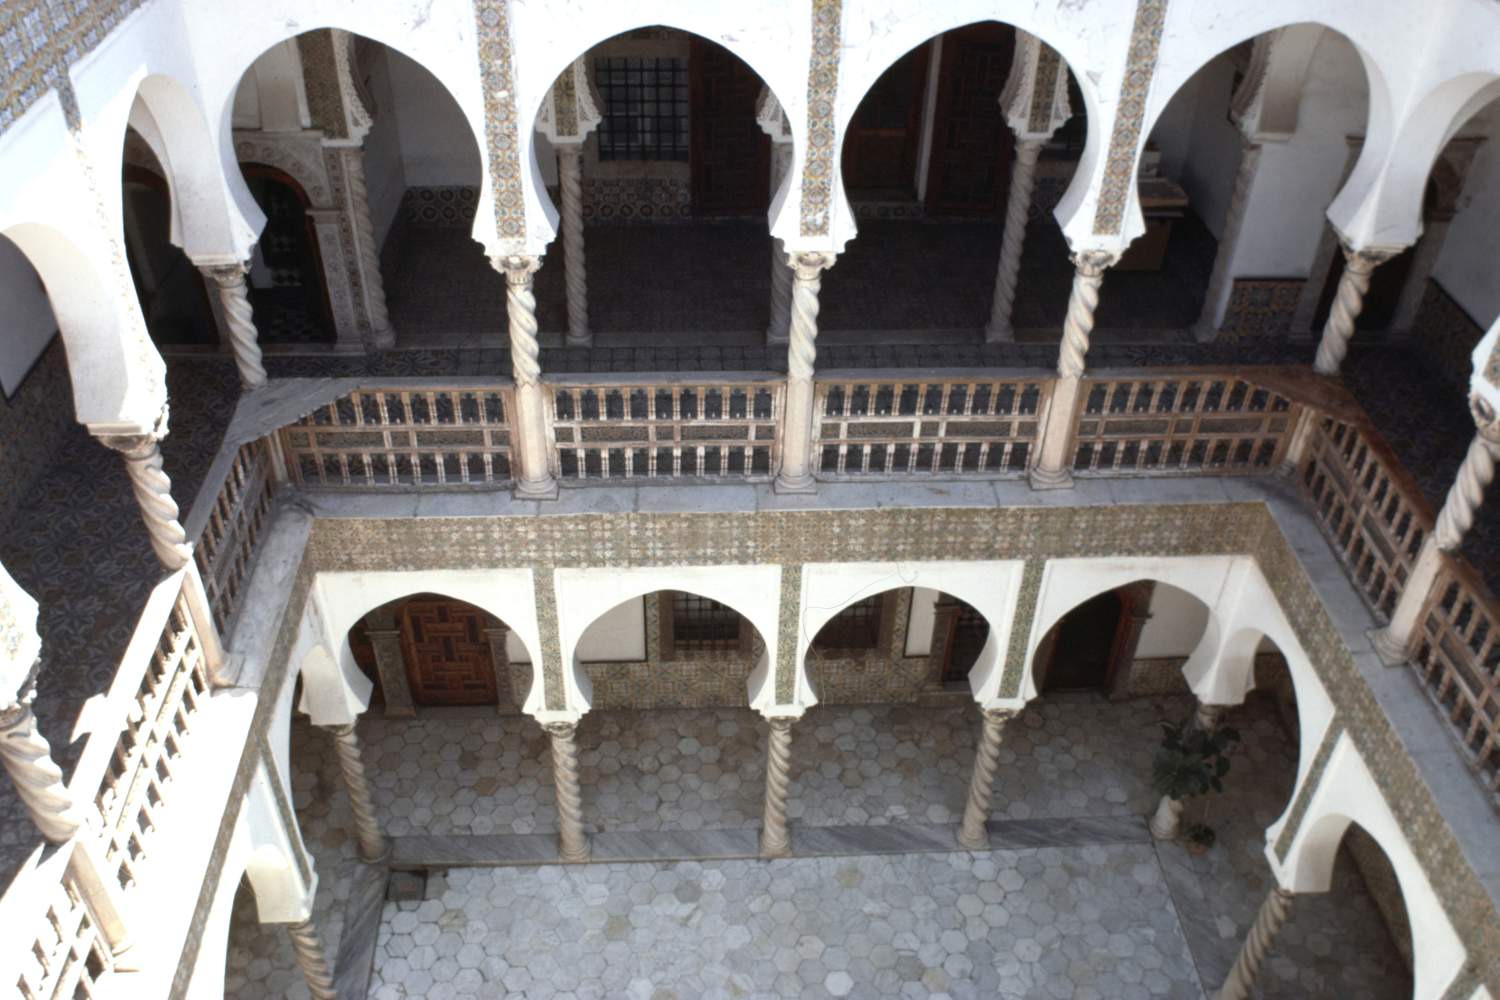 View of the courtyard from above&nbsp;